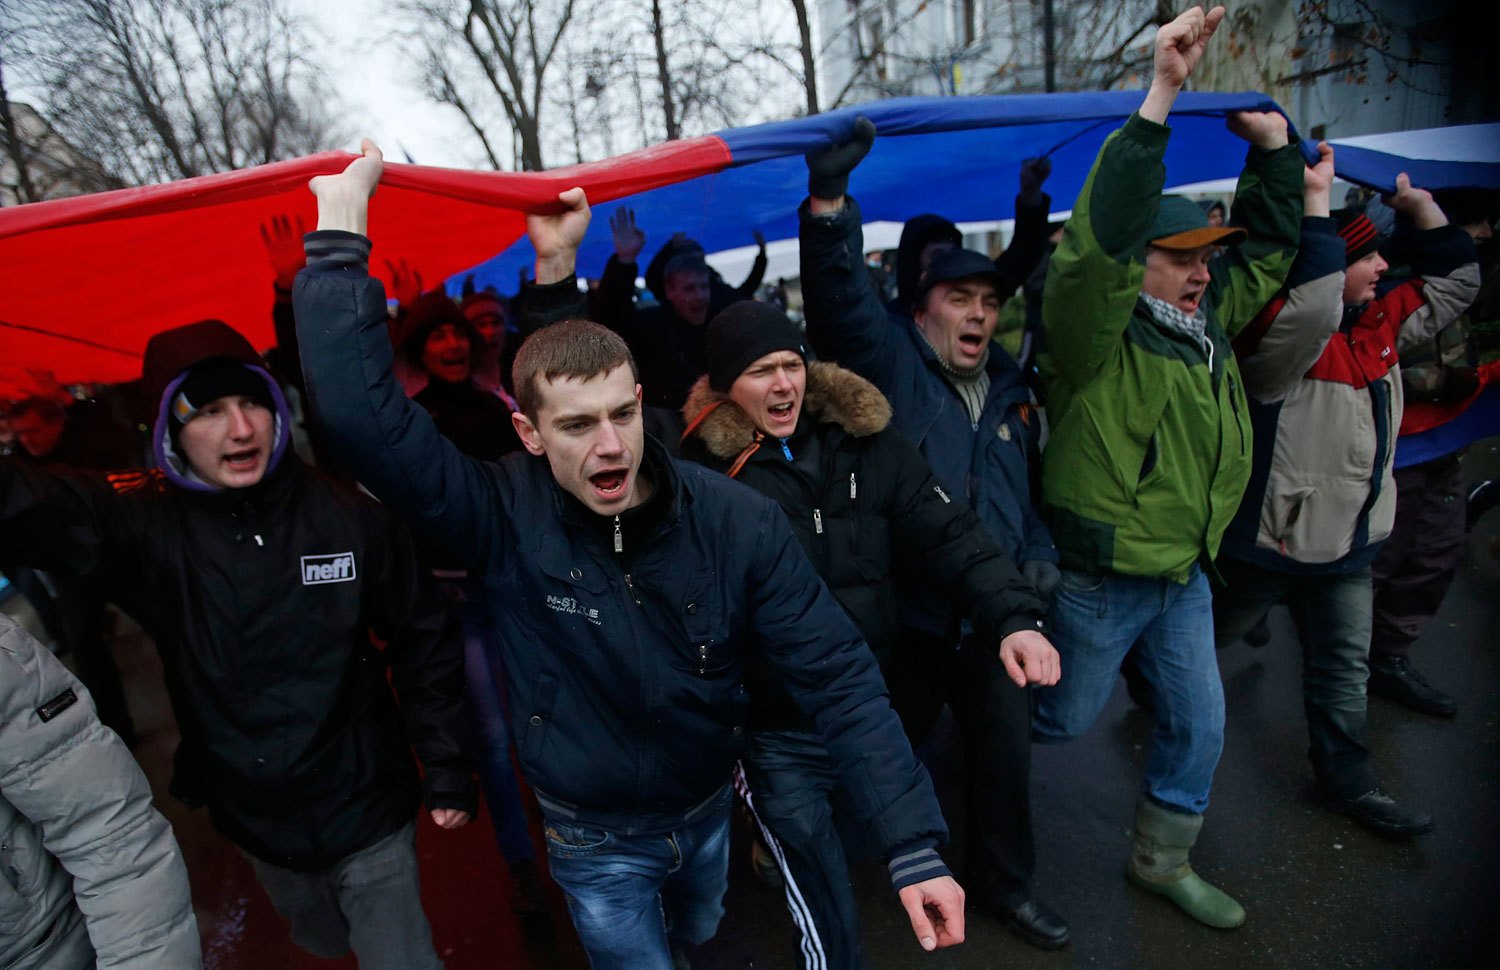 People carry a giant Russian flag during a pro-Russian rally in Simferopol, Feb. 27, 2014.